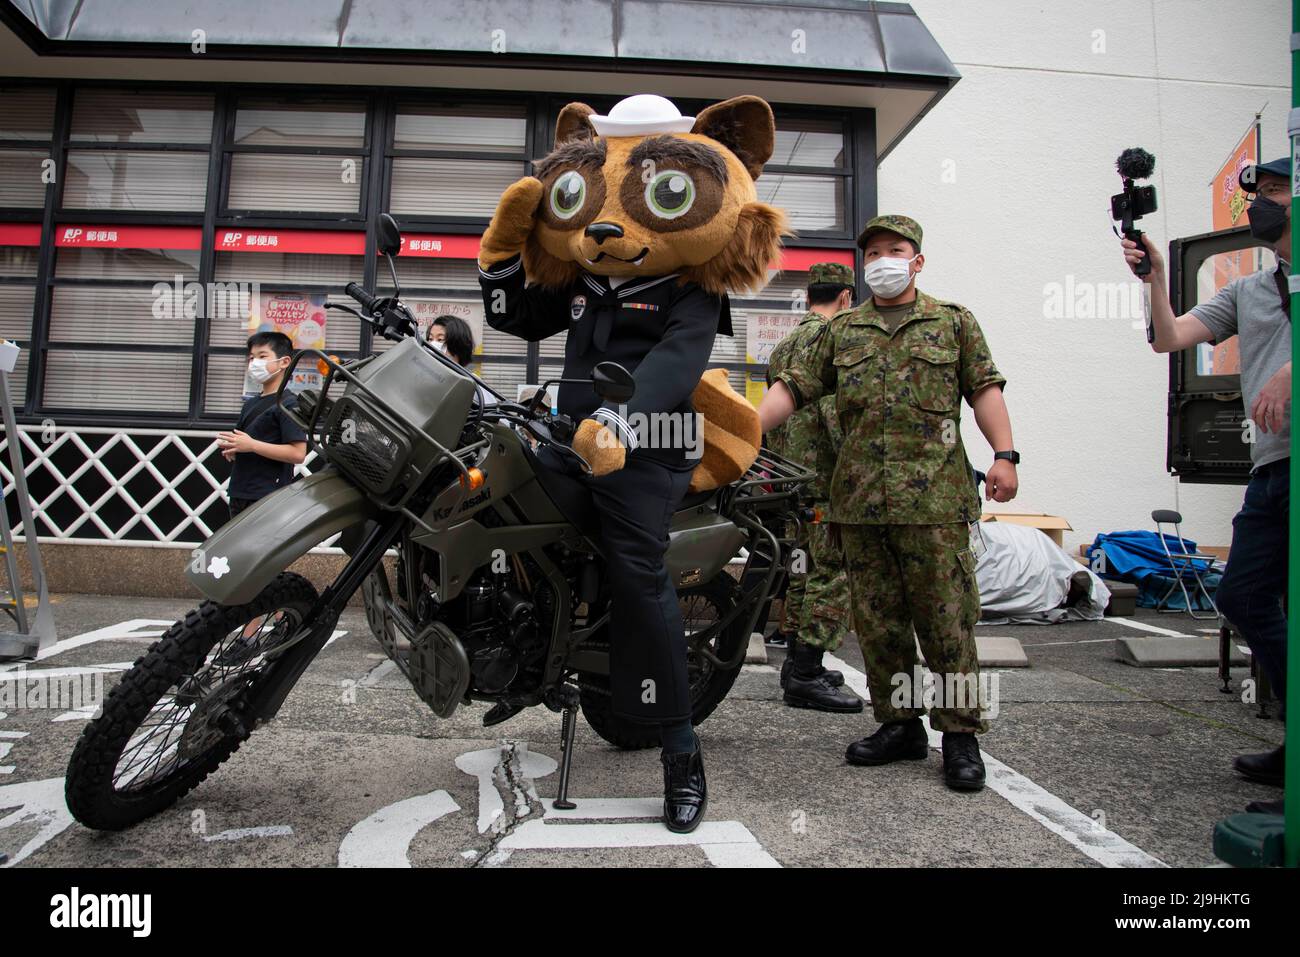 Shimoda, Japan. 22nd May, 2022. Yoko-pon, the official mascot of Commander, U.S. Navy Fleet Activities Yokosuka, poses on a motorcycle during the 83rd annual Shimoda Black Ship festival May 22, 2022 in Shimoda, Japan. The Shimoda Black Ship festival, or Shimoda Kurofune, celebrates the arrival of Commodore Matthew Perry and the opening of Japan to the outside world. Credit: MC1 Kaleb J. Sarten/U.S. Air Force/Alamy Live News Stock Photo